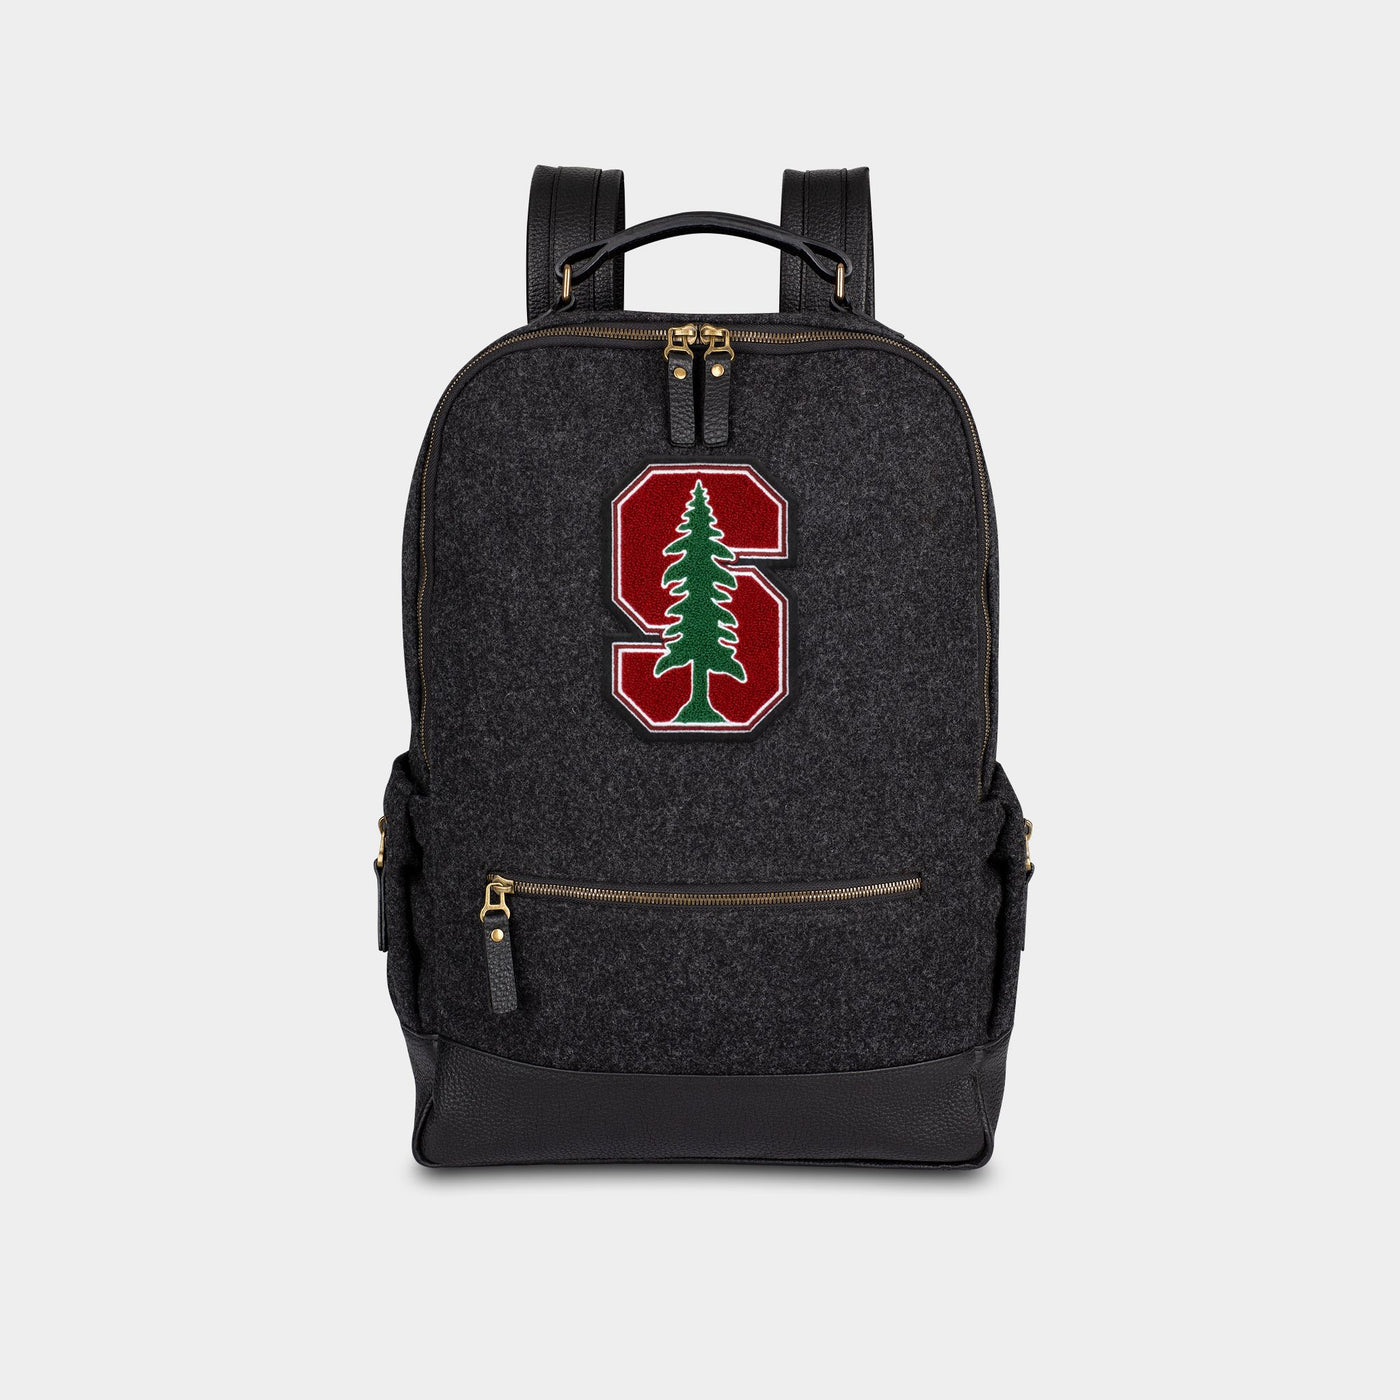 Stanford Cardinal Backpack